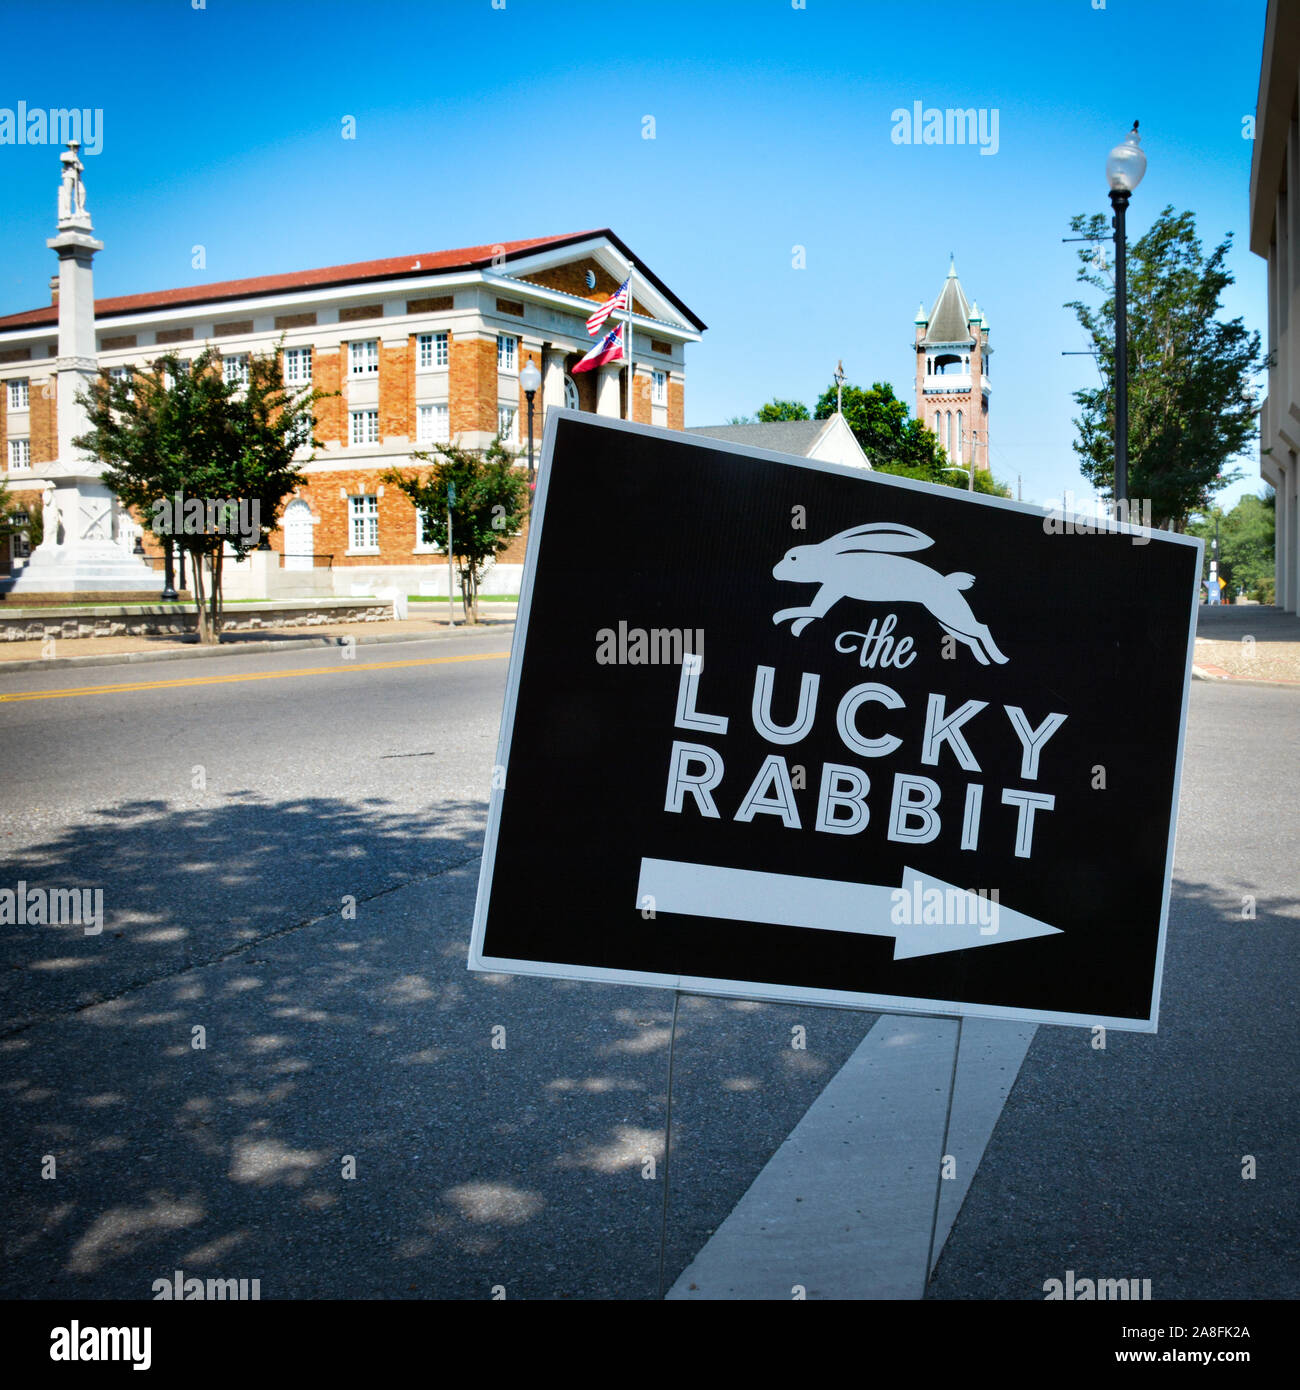 A vintage consignment event monthly at the Lucky Rabbit, sign with arrow and jumping rabbit clip art at corner in downtown Hattiesburg, MS, USA Stock Photo